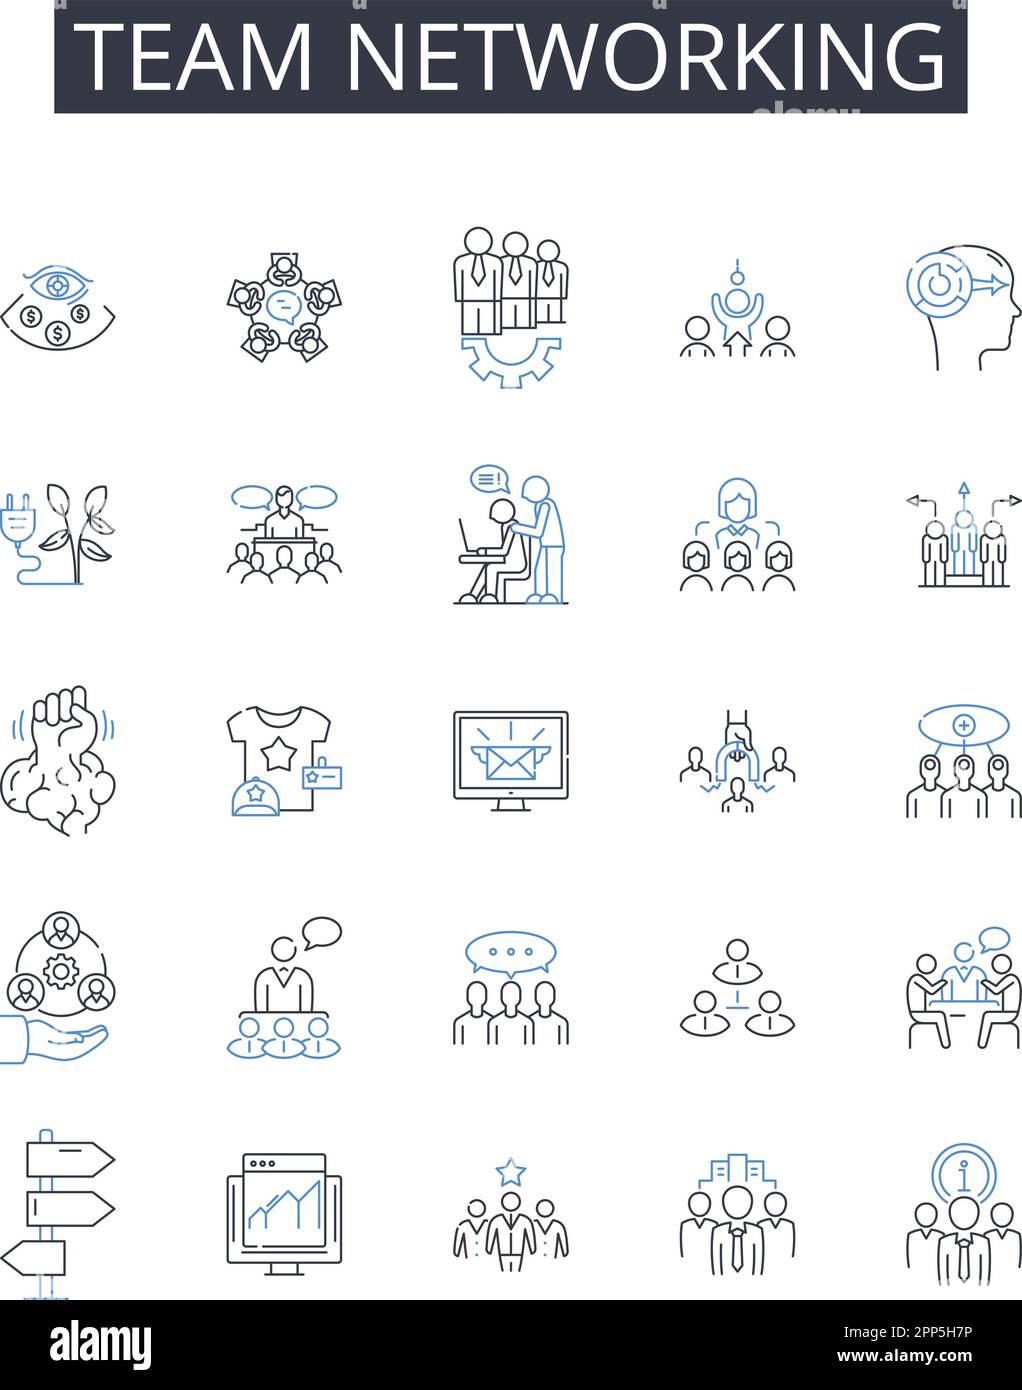 Team networking line icons collection. Group collaboration, Partnership ...